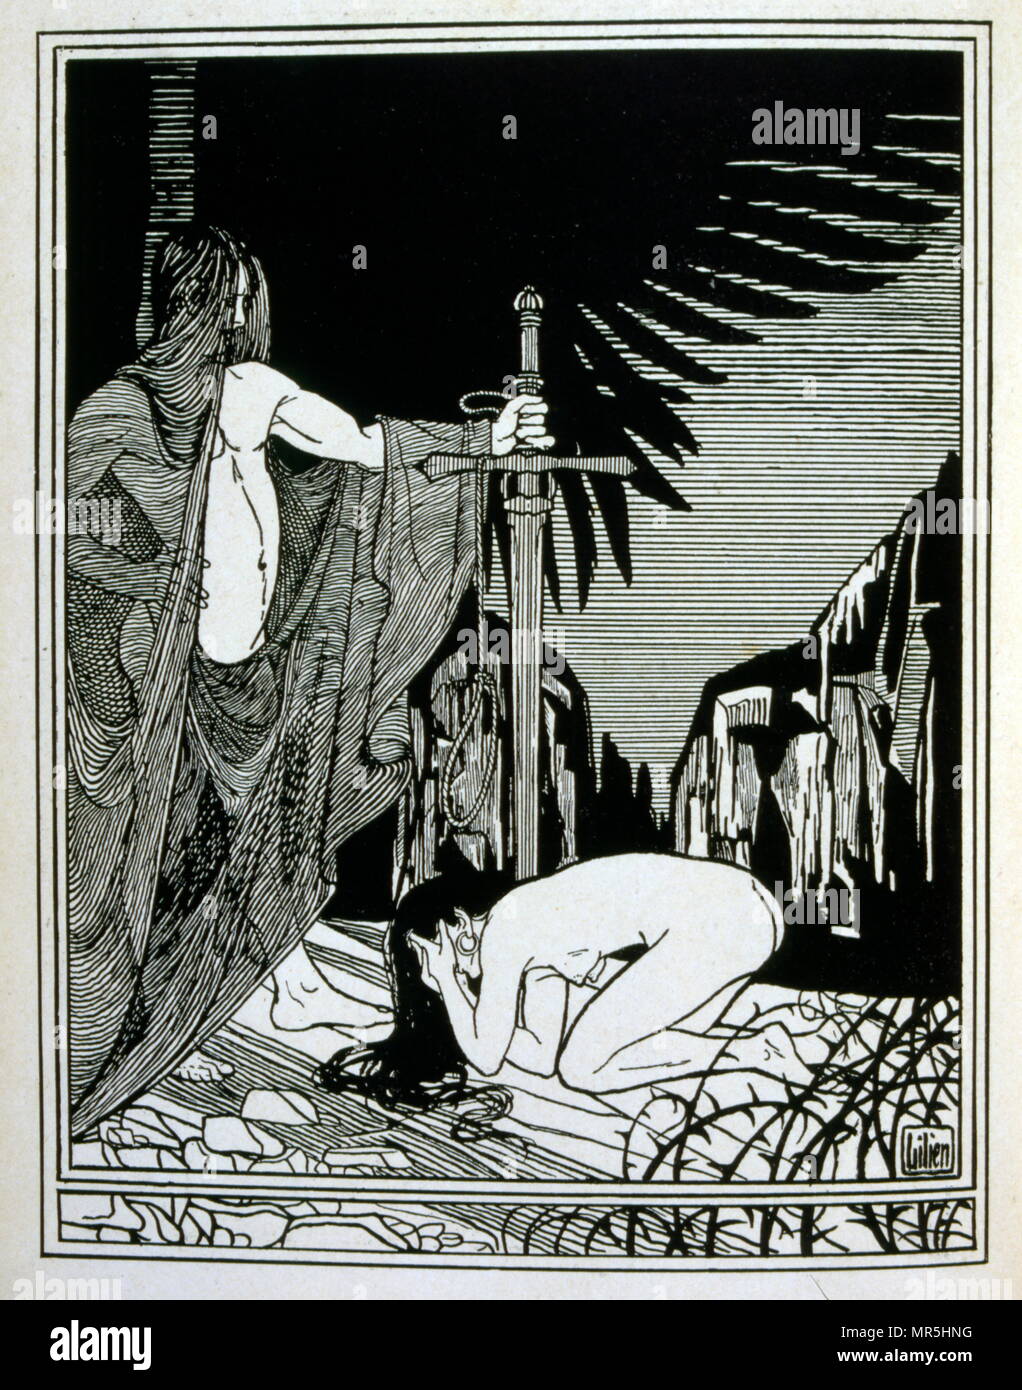 Judah', a collection of ballads by the non-Jewish poet Börries von Münchhausen 1874 - 1945. Illustrated by Ephraim Moses Lilien (1874–1925), art nouveau illustrator and printmaker, noted for his art on Jewish themes. He is sometimes called the 'first Zionist artist. Münchhausen's relationship to Judaism remained ambivalent: Munchhausen did not consider the 'Jewish race' inferior, but merely wanted to prevent a 'mixture' with the non-Jewish Germans. Stock Photo